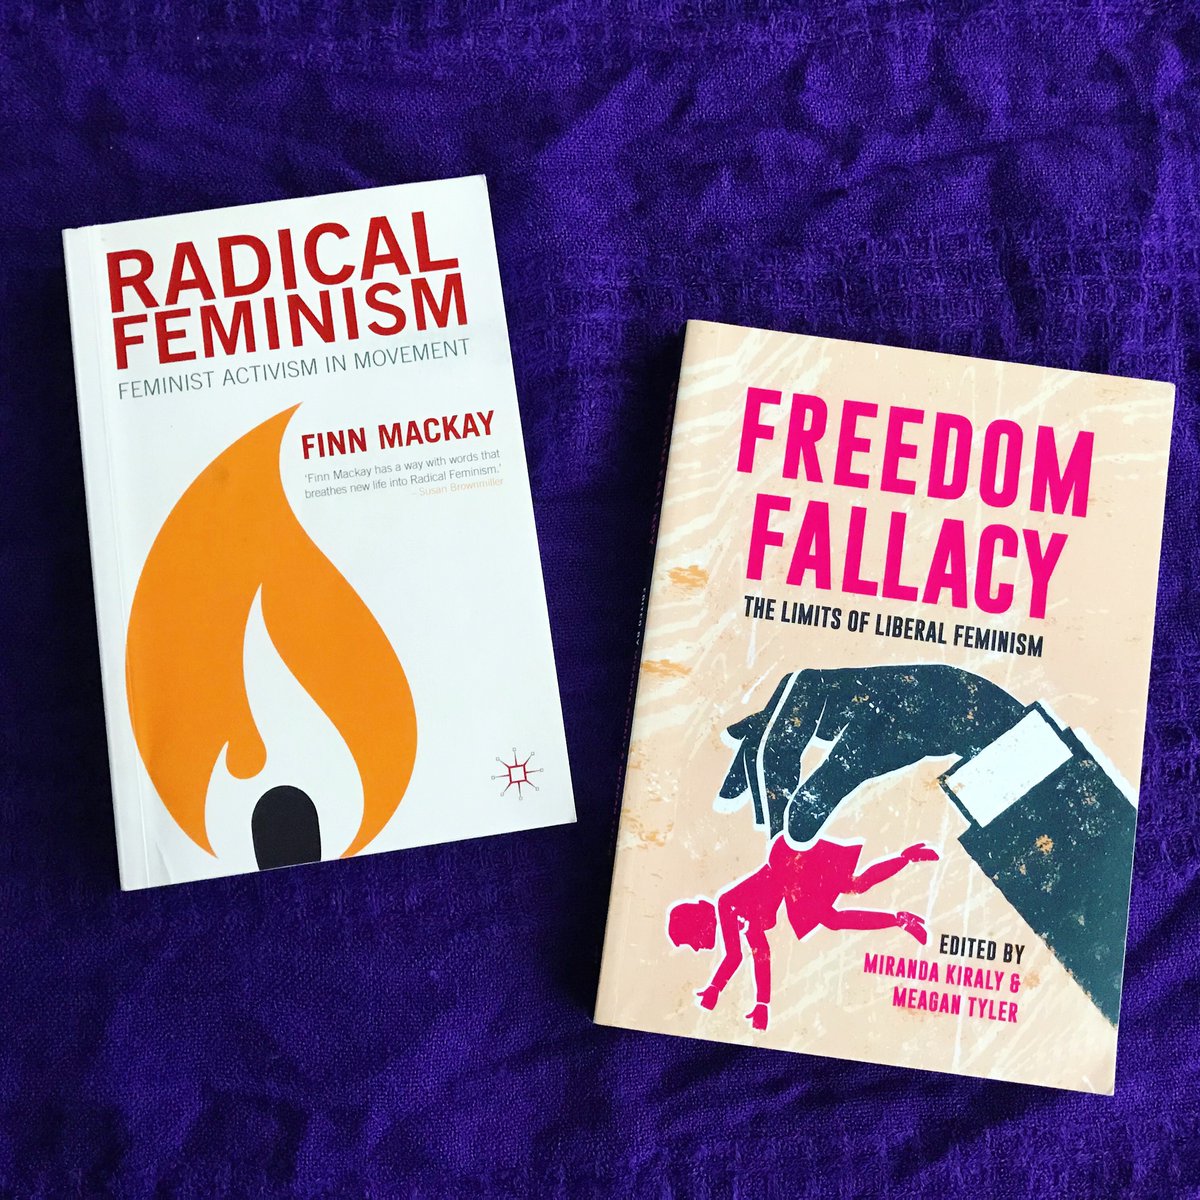  Radical Feminism: Feminist Activism in Movement, by  @Finn_Mackay  Freedom Fallacy: The Limits or Liberal Feminism, ed. Miranda Kiraly &  @DrMeaganTyler 2 books on the resurgence of radical feminist activism & thought, the necessity of these politics. #OurFeministLibrary